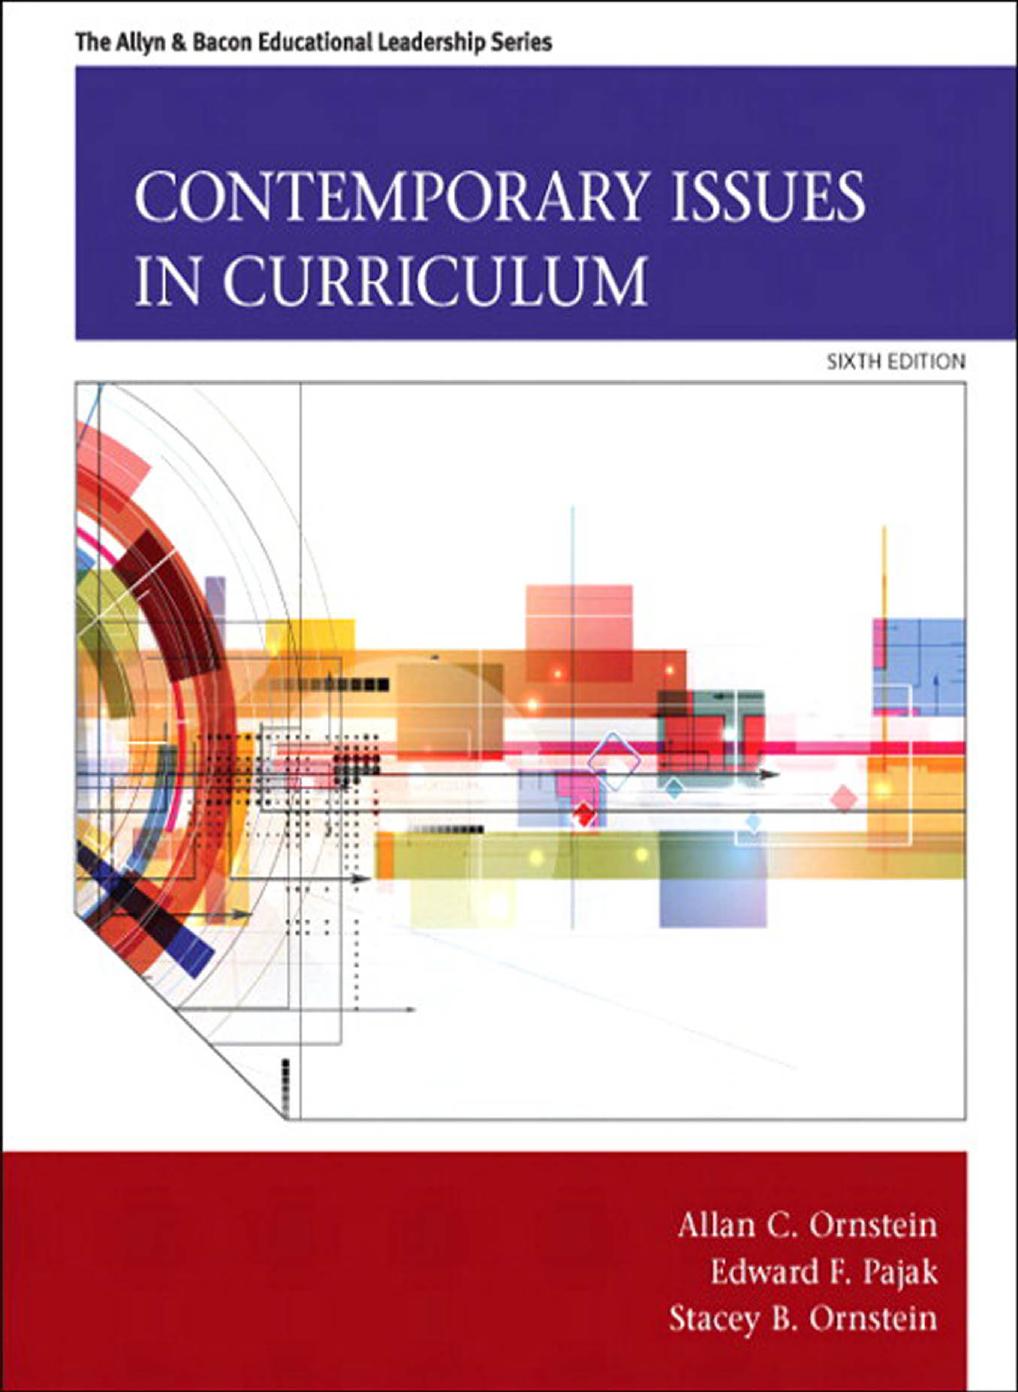 Contemporary Issues in Curriculum 6th Edition by Allan C. Ornstein - Wei Zhi.jpg